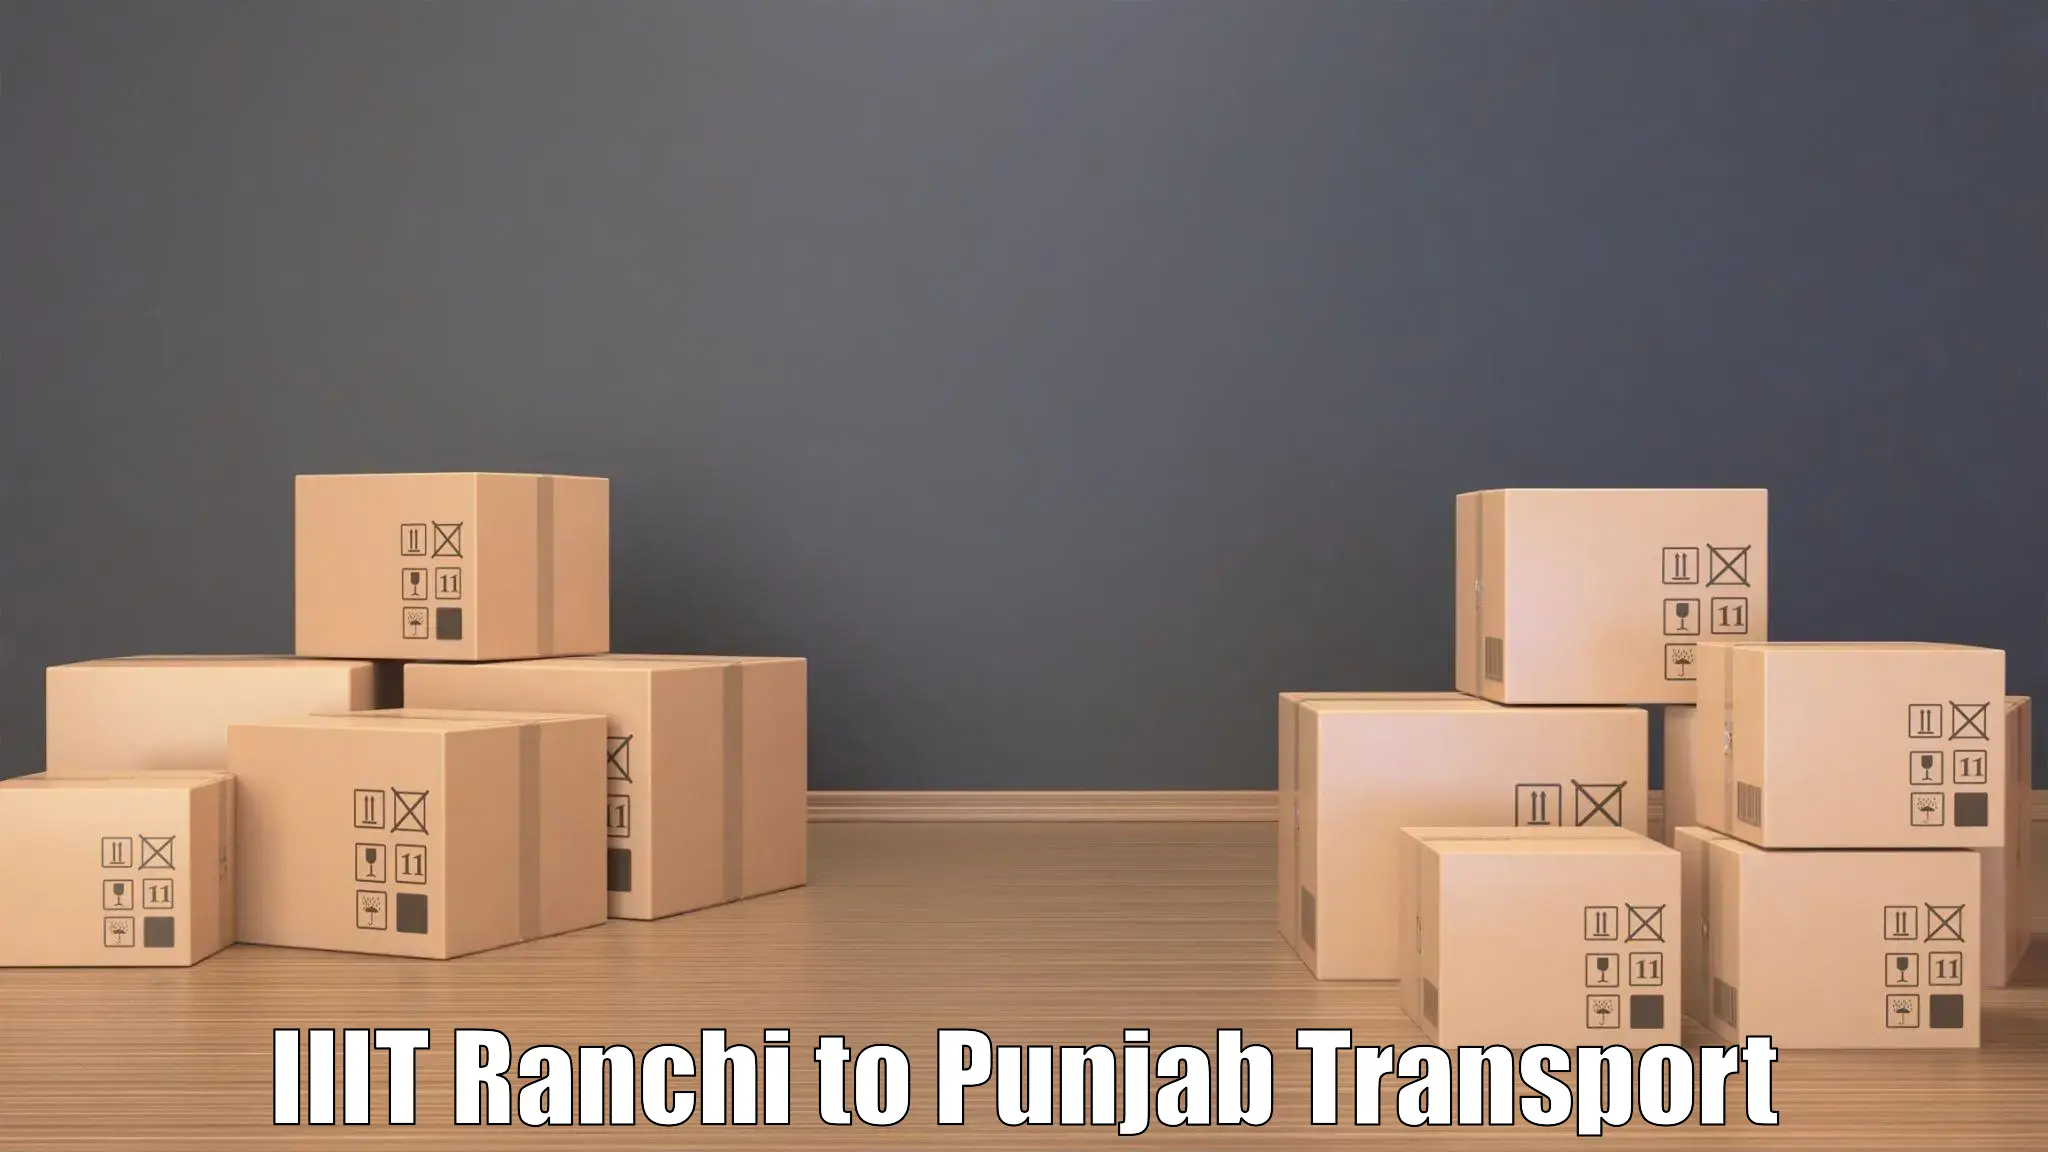 All India transport service IIIT Ranchi to Sangrur